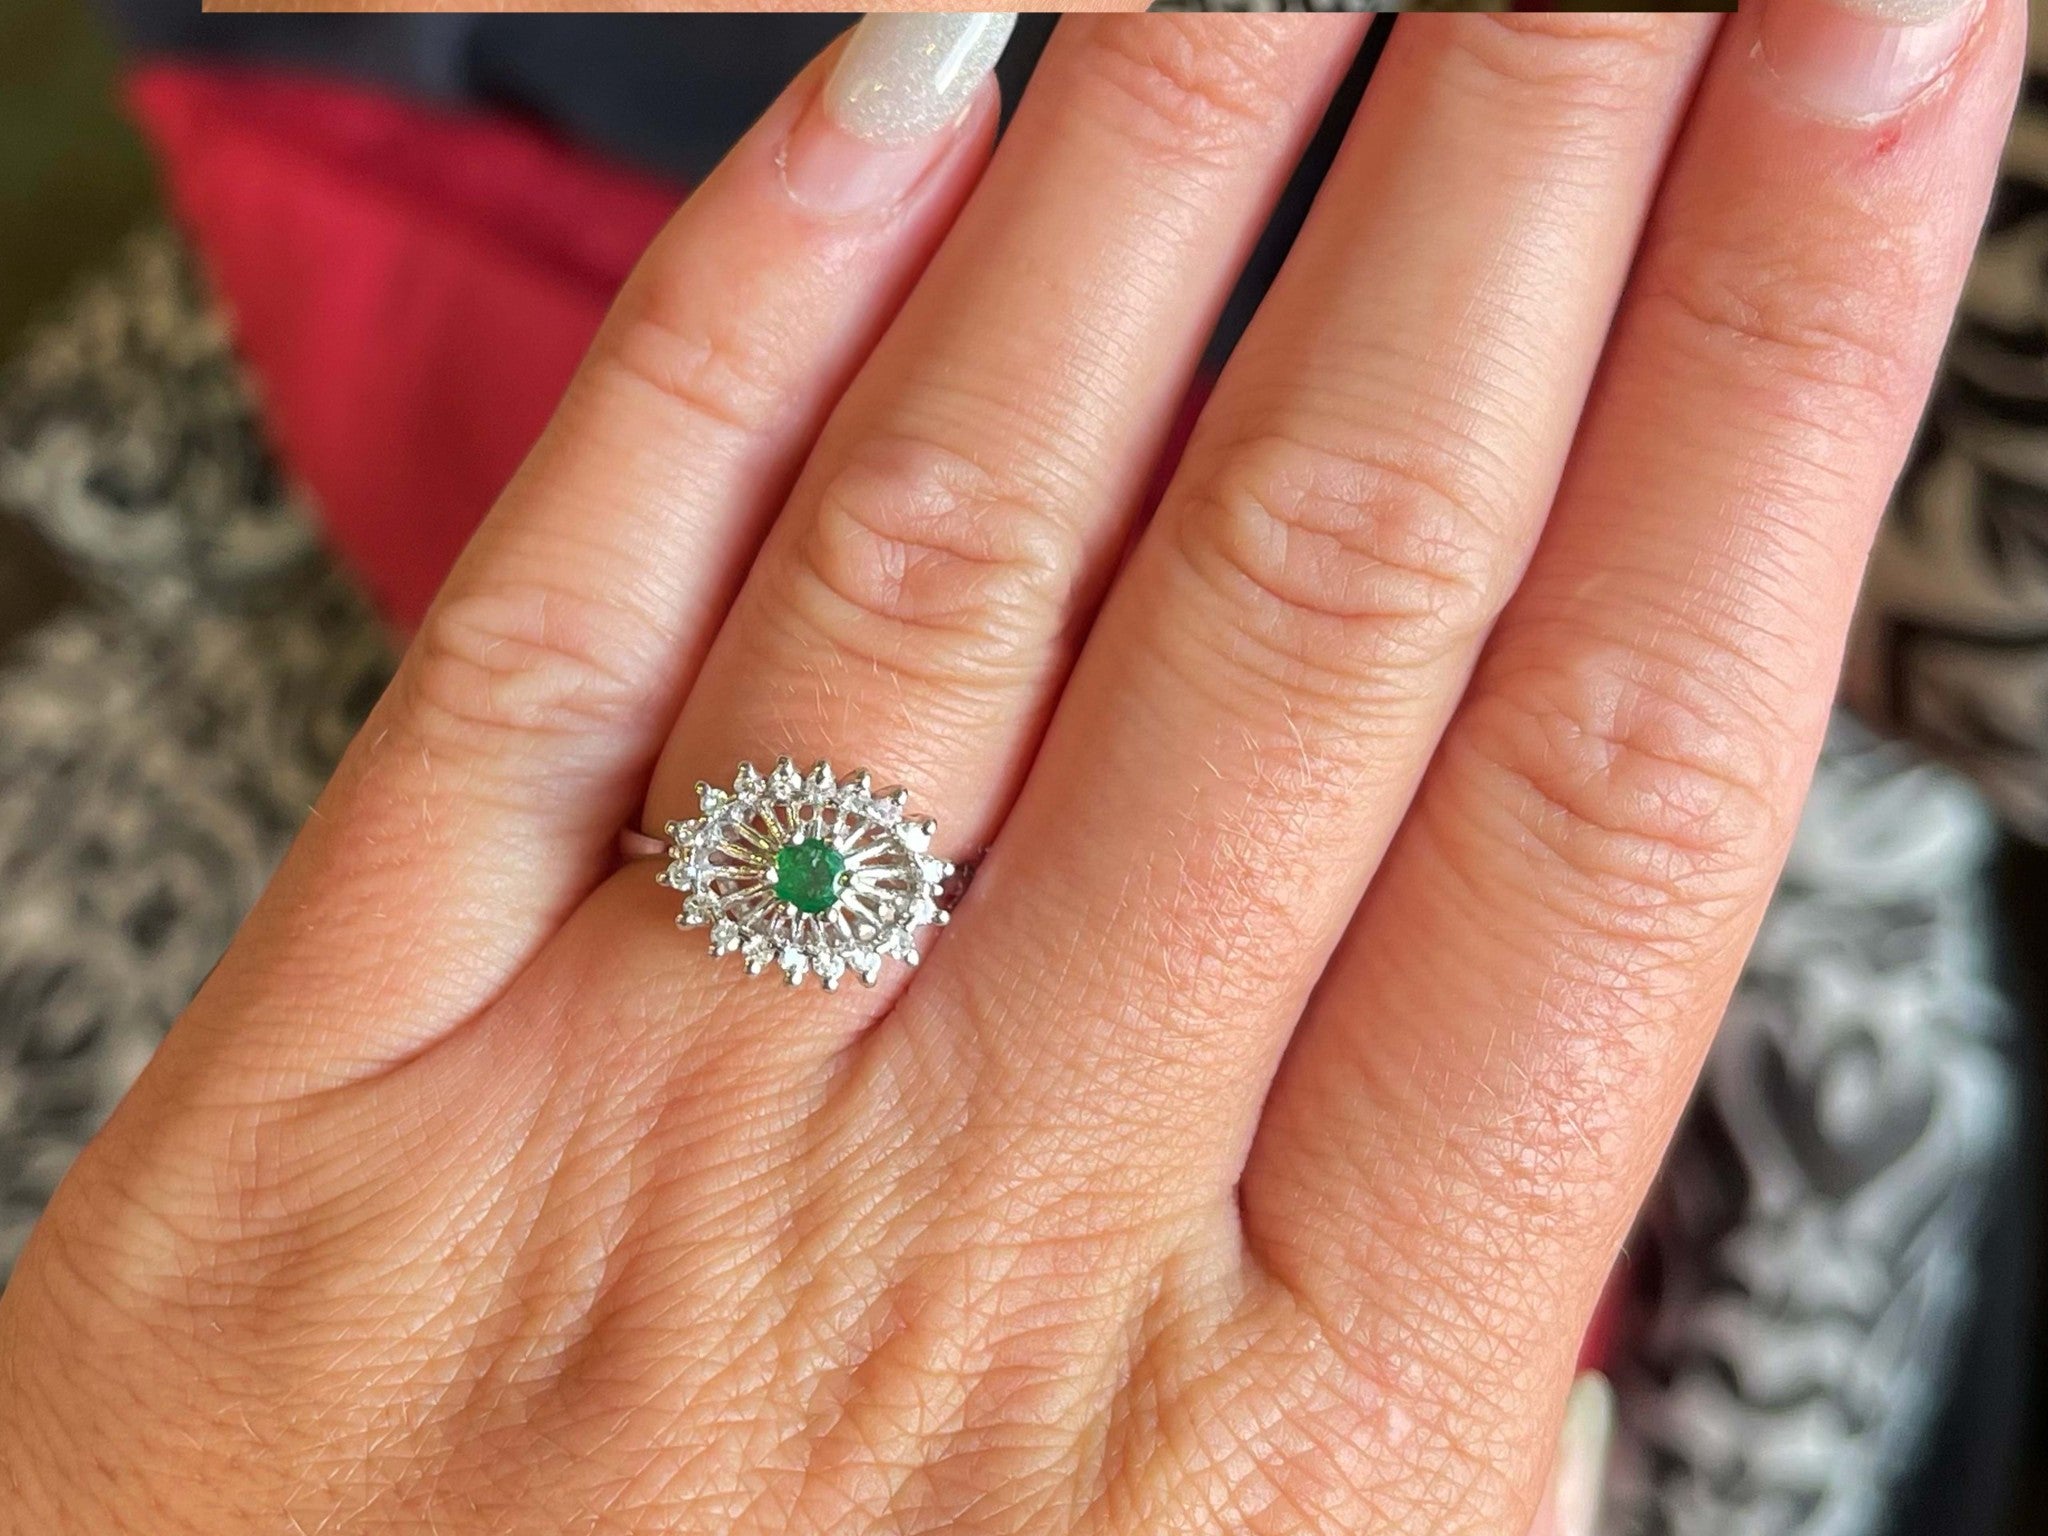 Green Emerald and Diamond Halo Ring in 14k White Gold